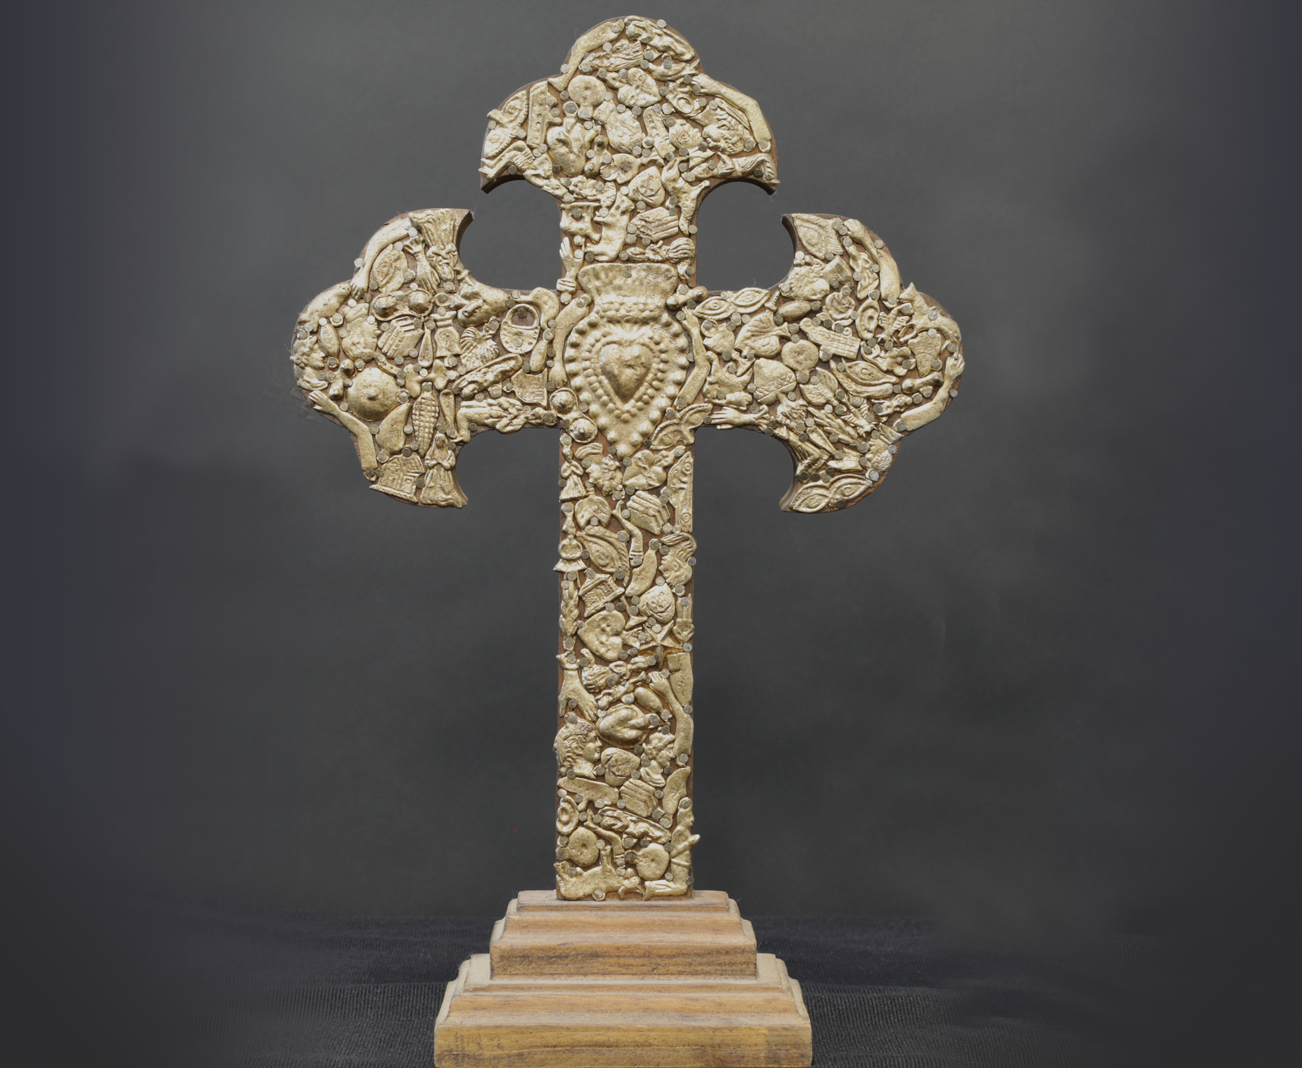 Cross from Mexico containing over 130 charms. The central charm is a symbol for Mary’s Immaculate Heart.